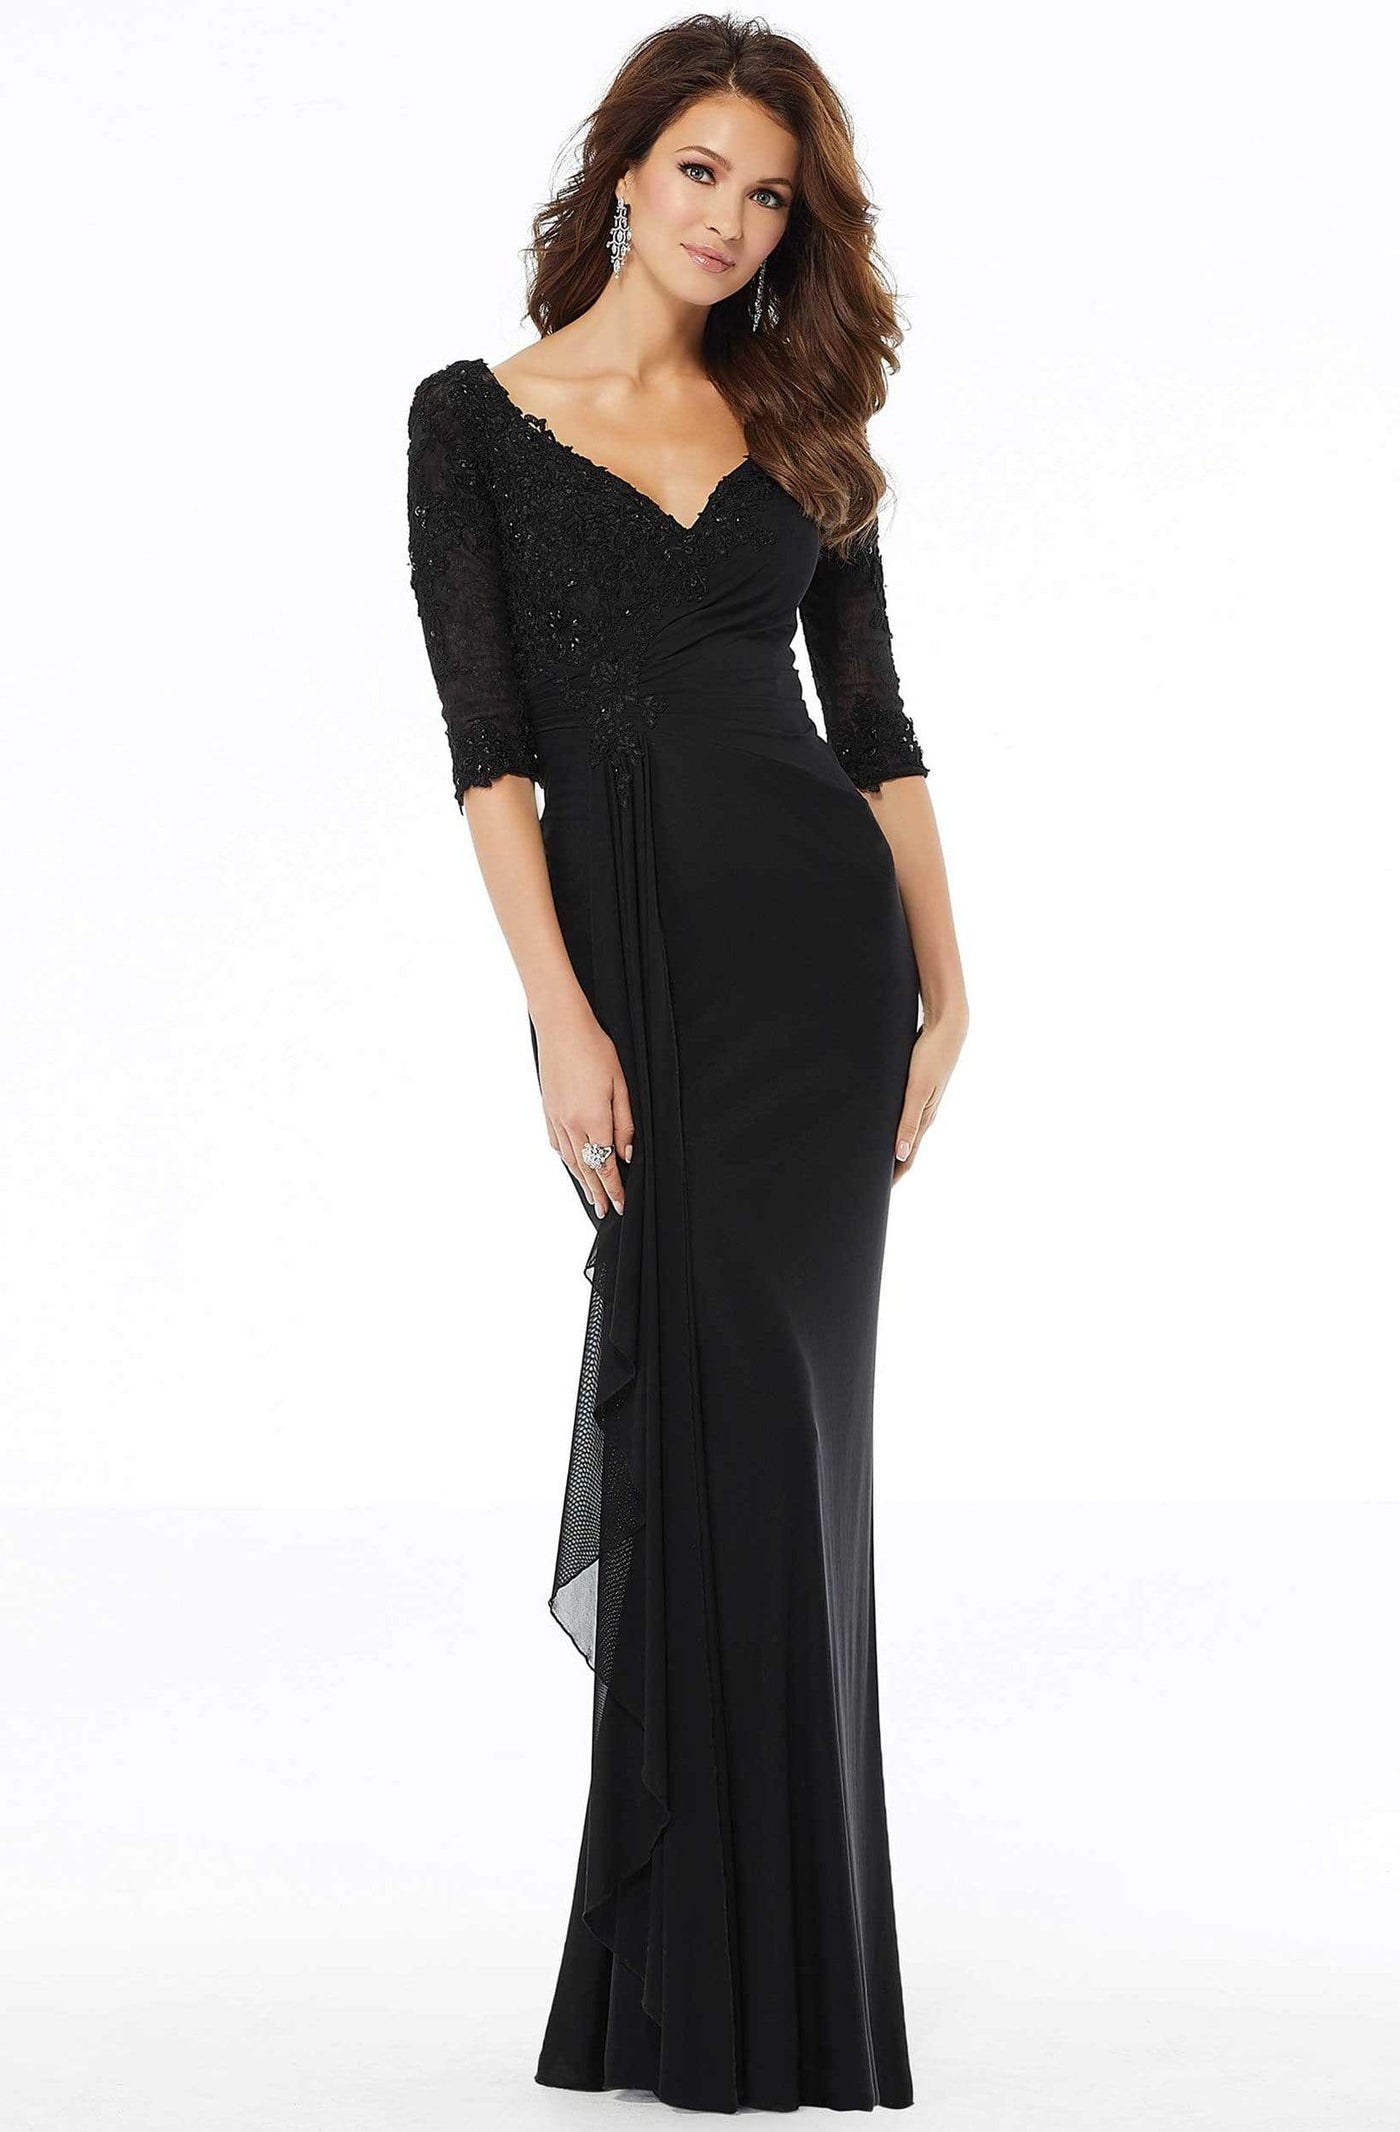 MGNY By Mori Lee - 72114 Beaded Lace Deep V-neck Sheath Dress Mother of the Bride Dresses 2 / Black